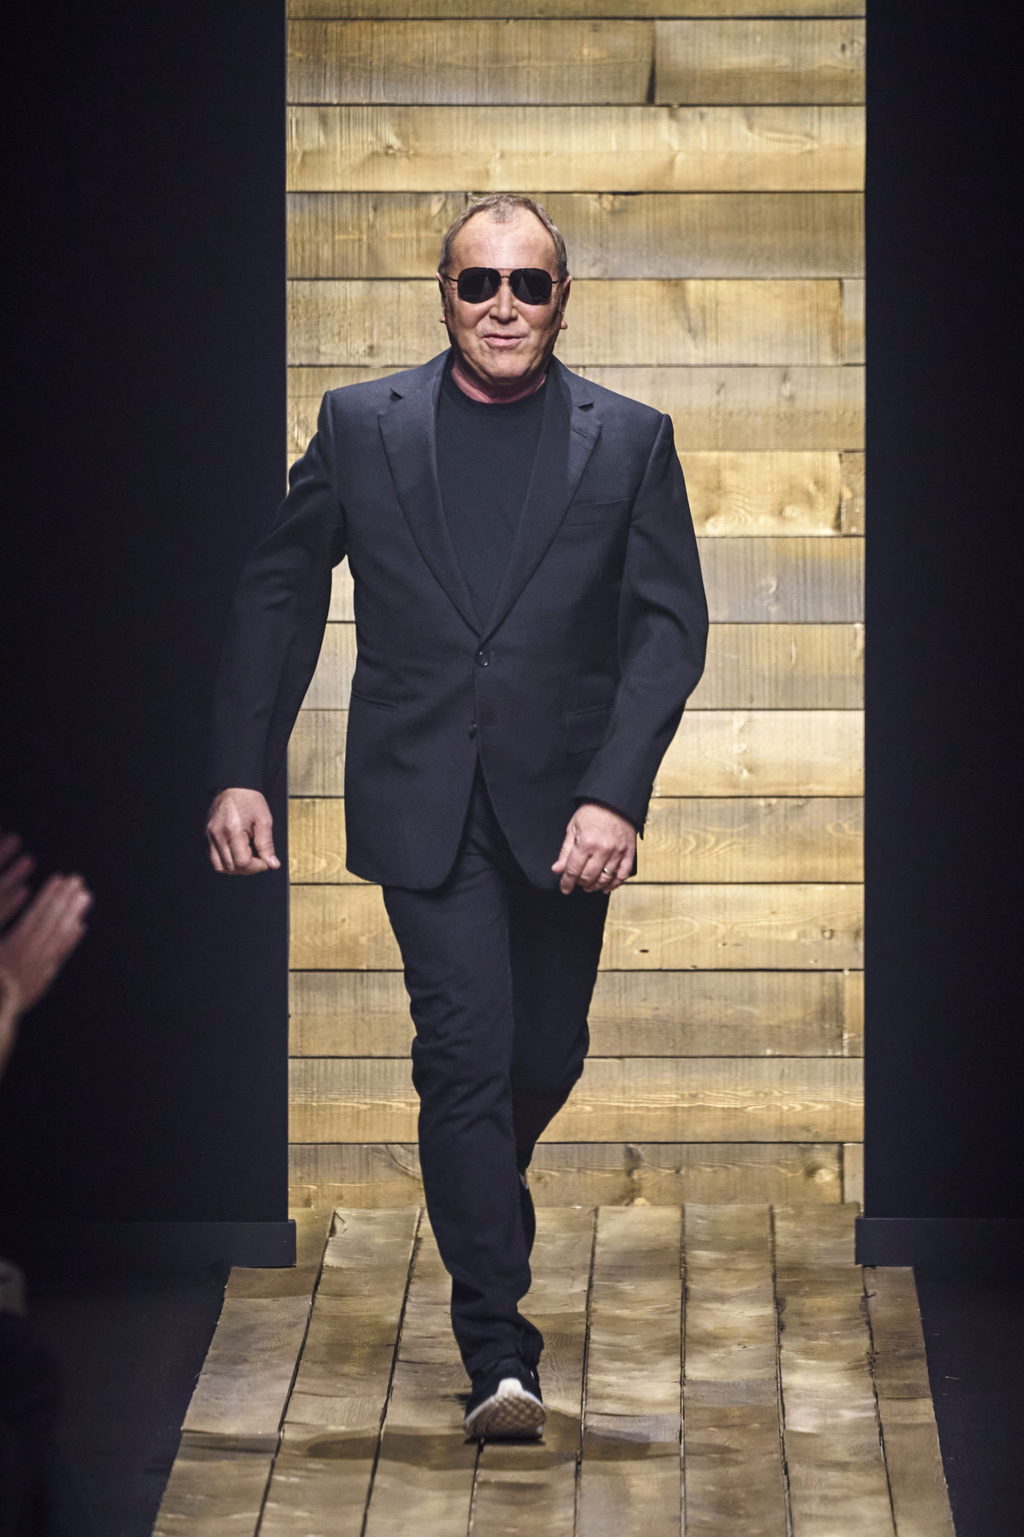 Know Your Fashion Designers: 10 Facts About Michael Kors - College Fashion